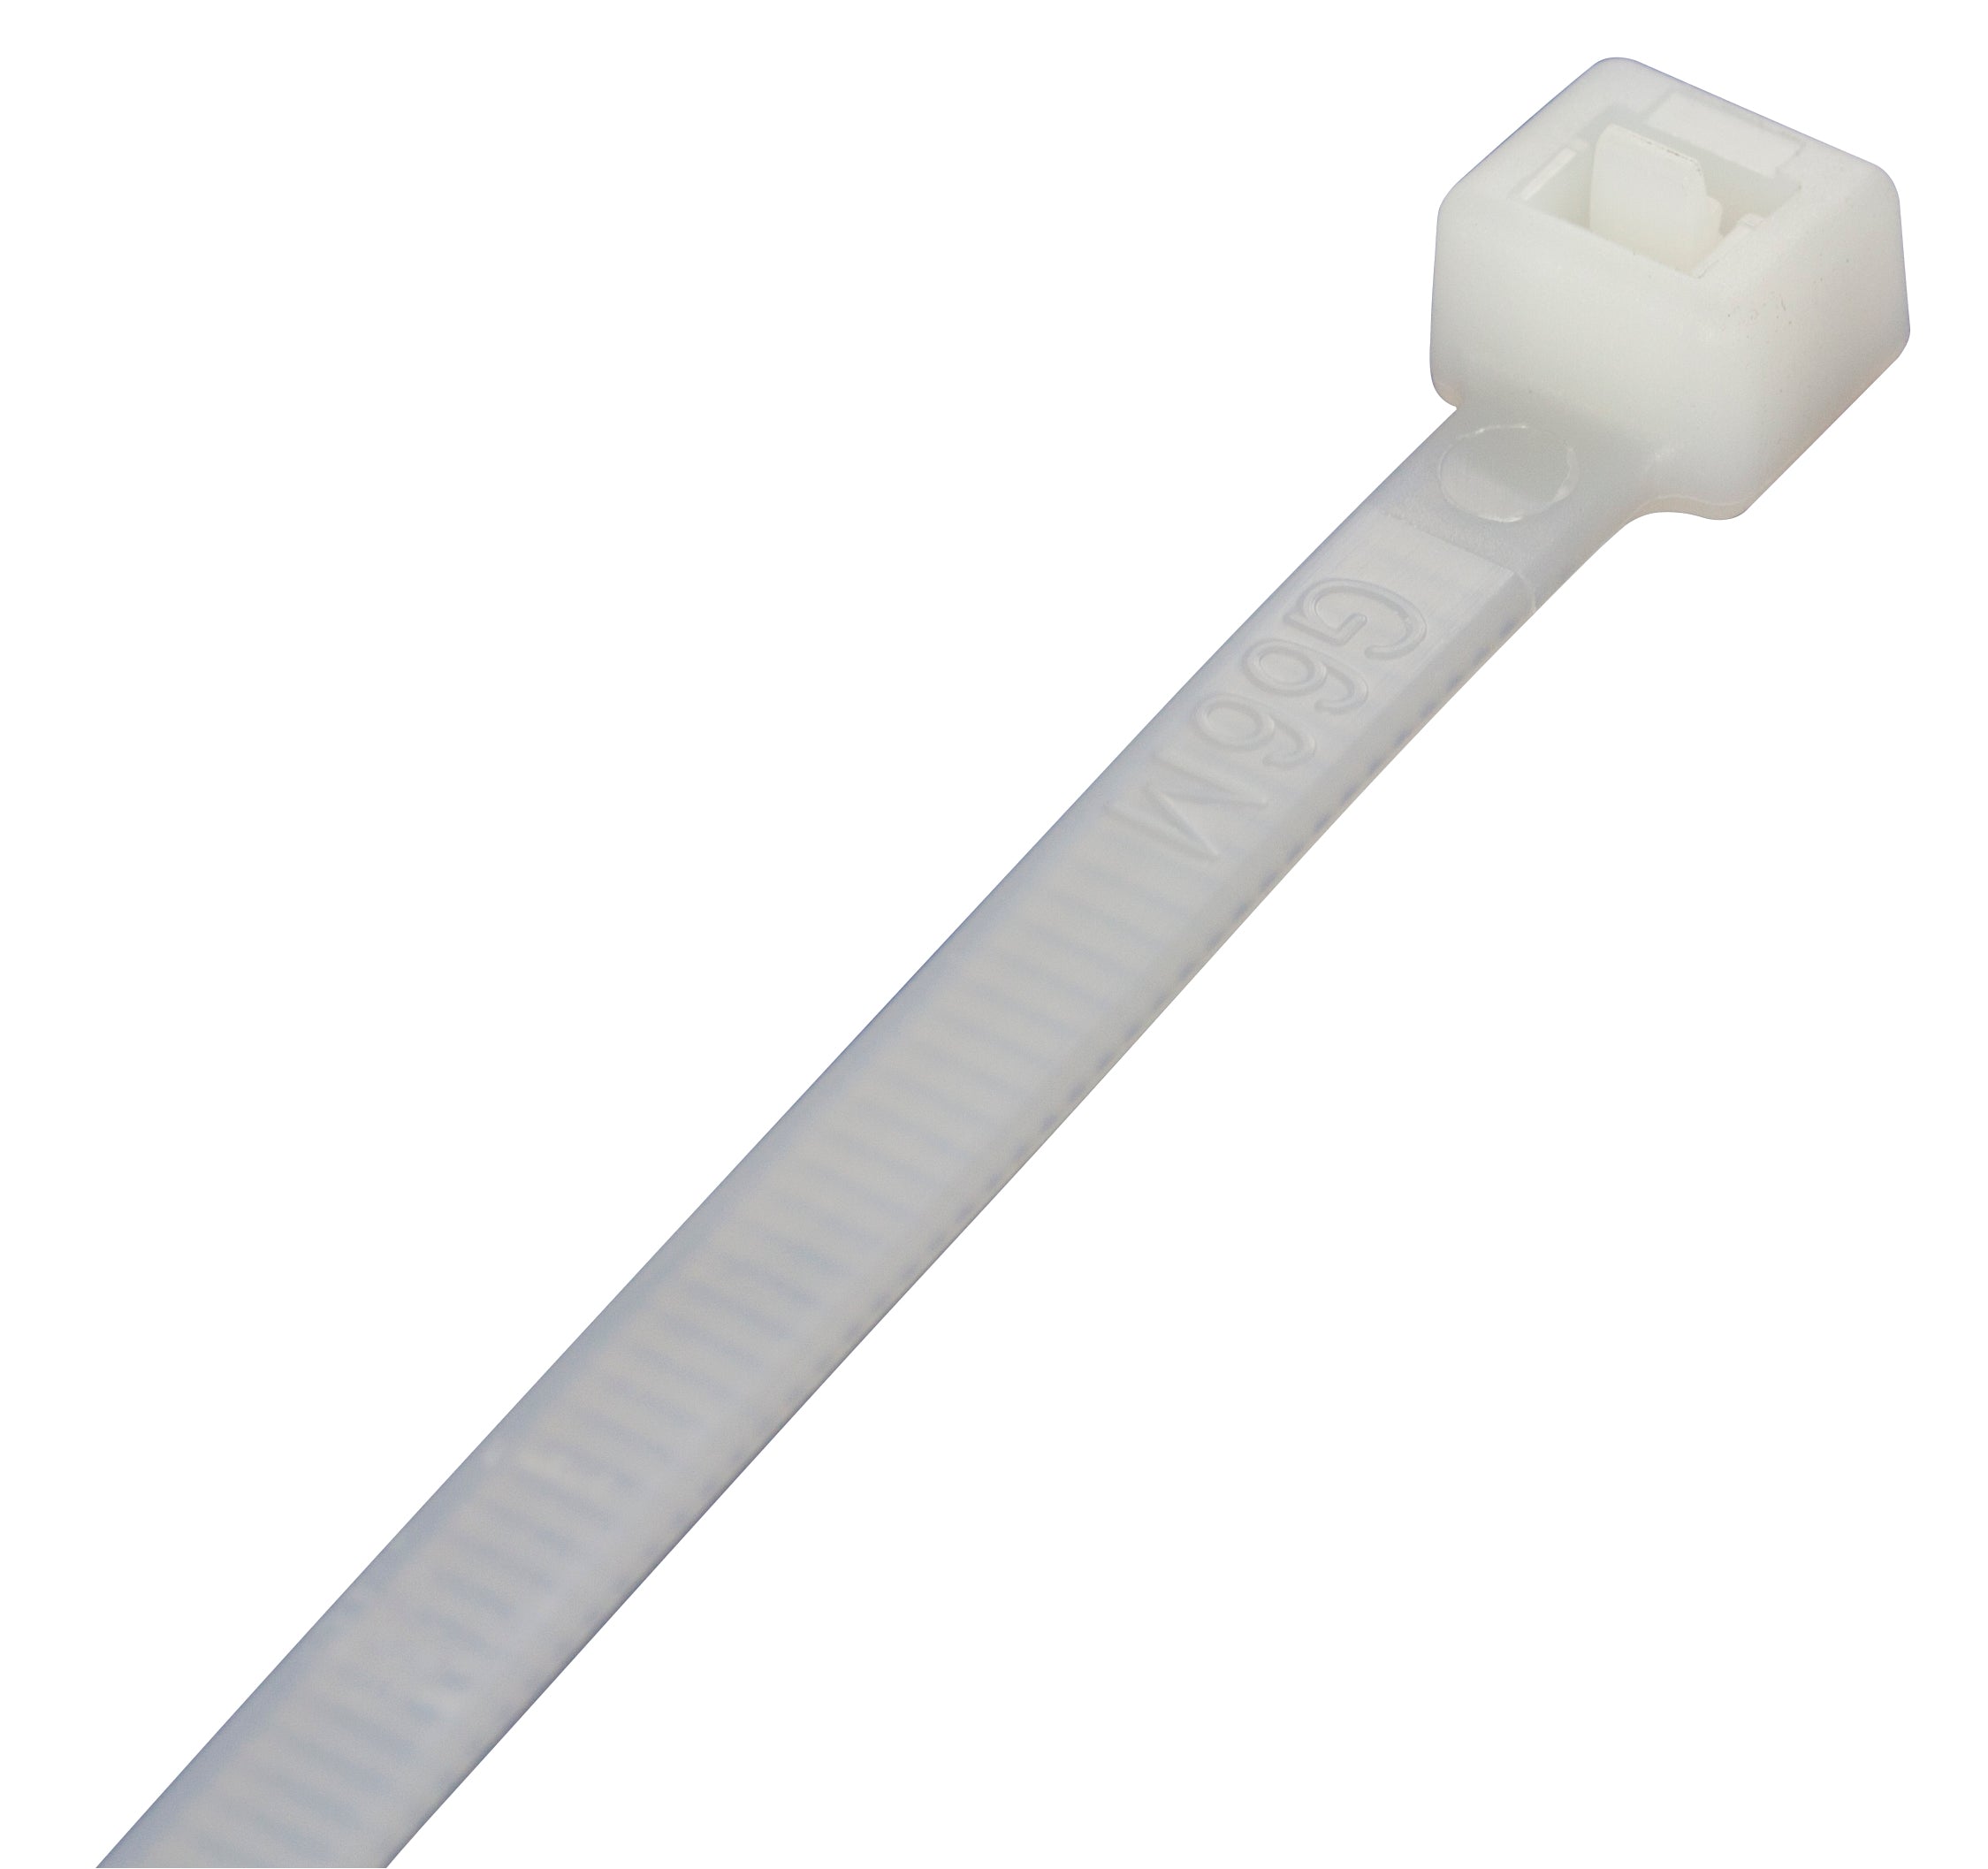 Premium Natural Cable Ties 200mm x 3.6mm - Pack of 100